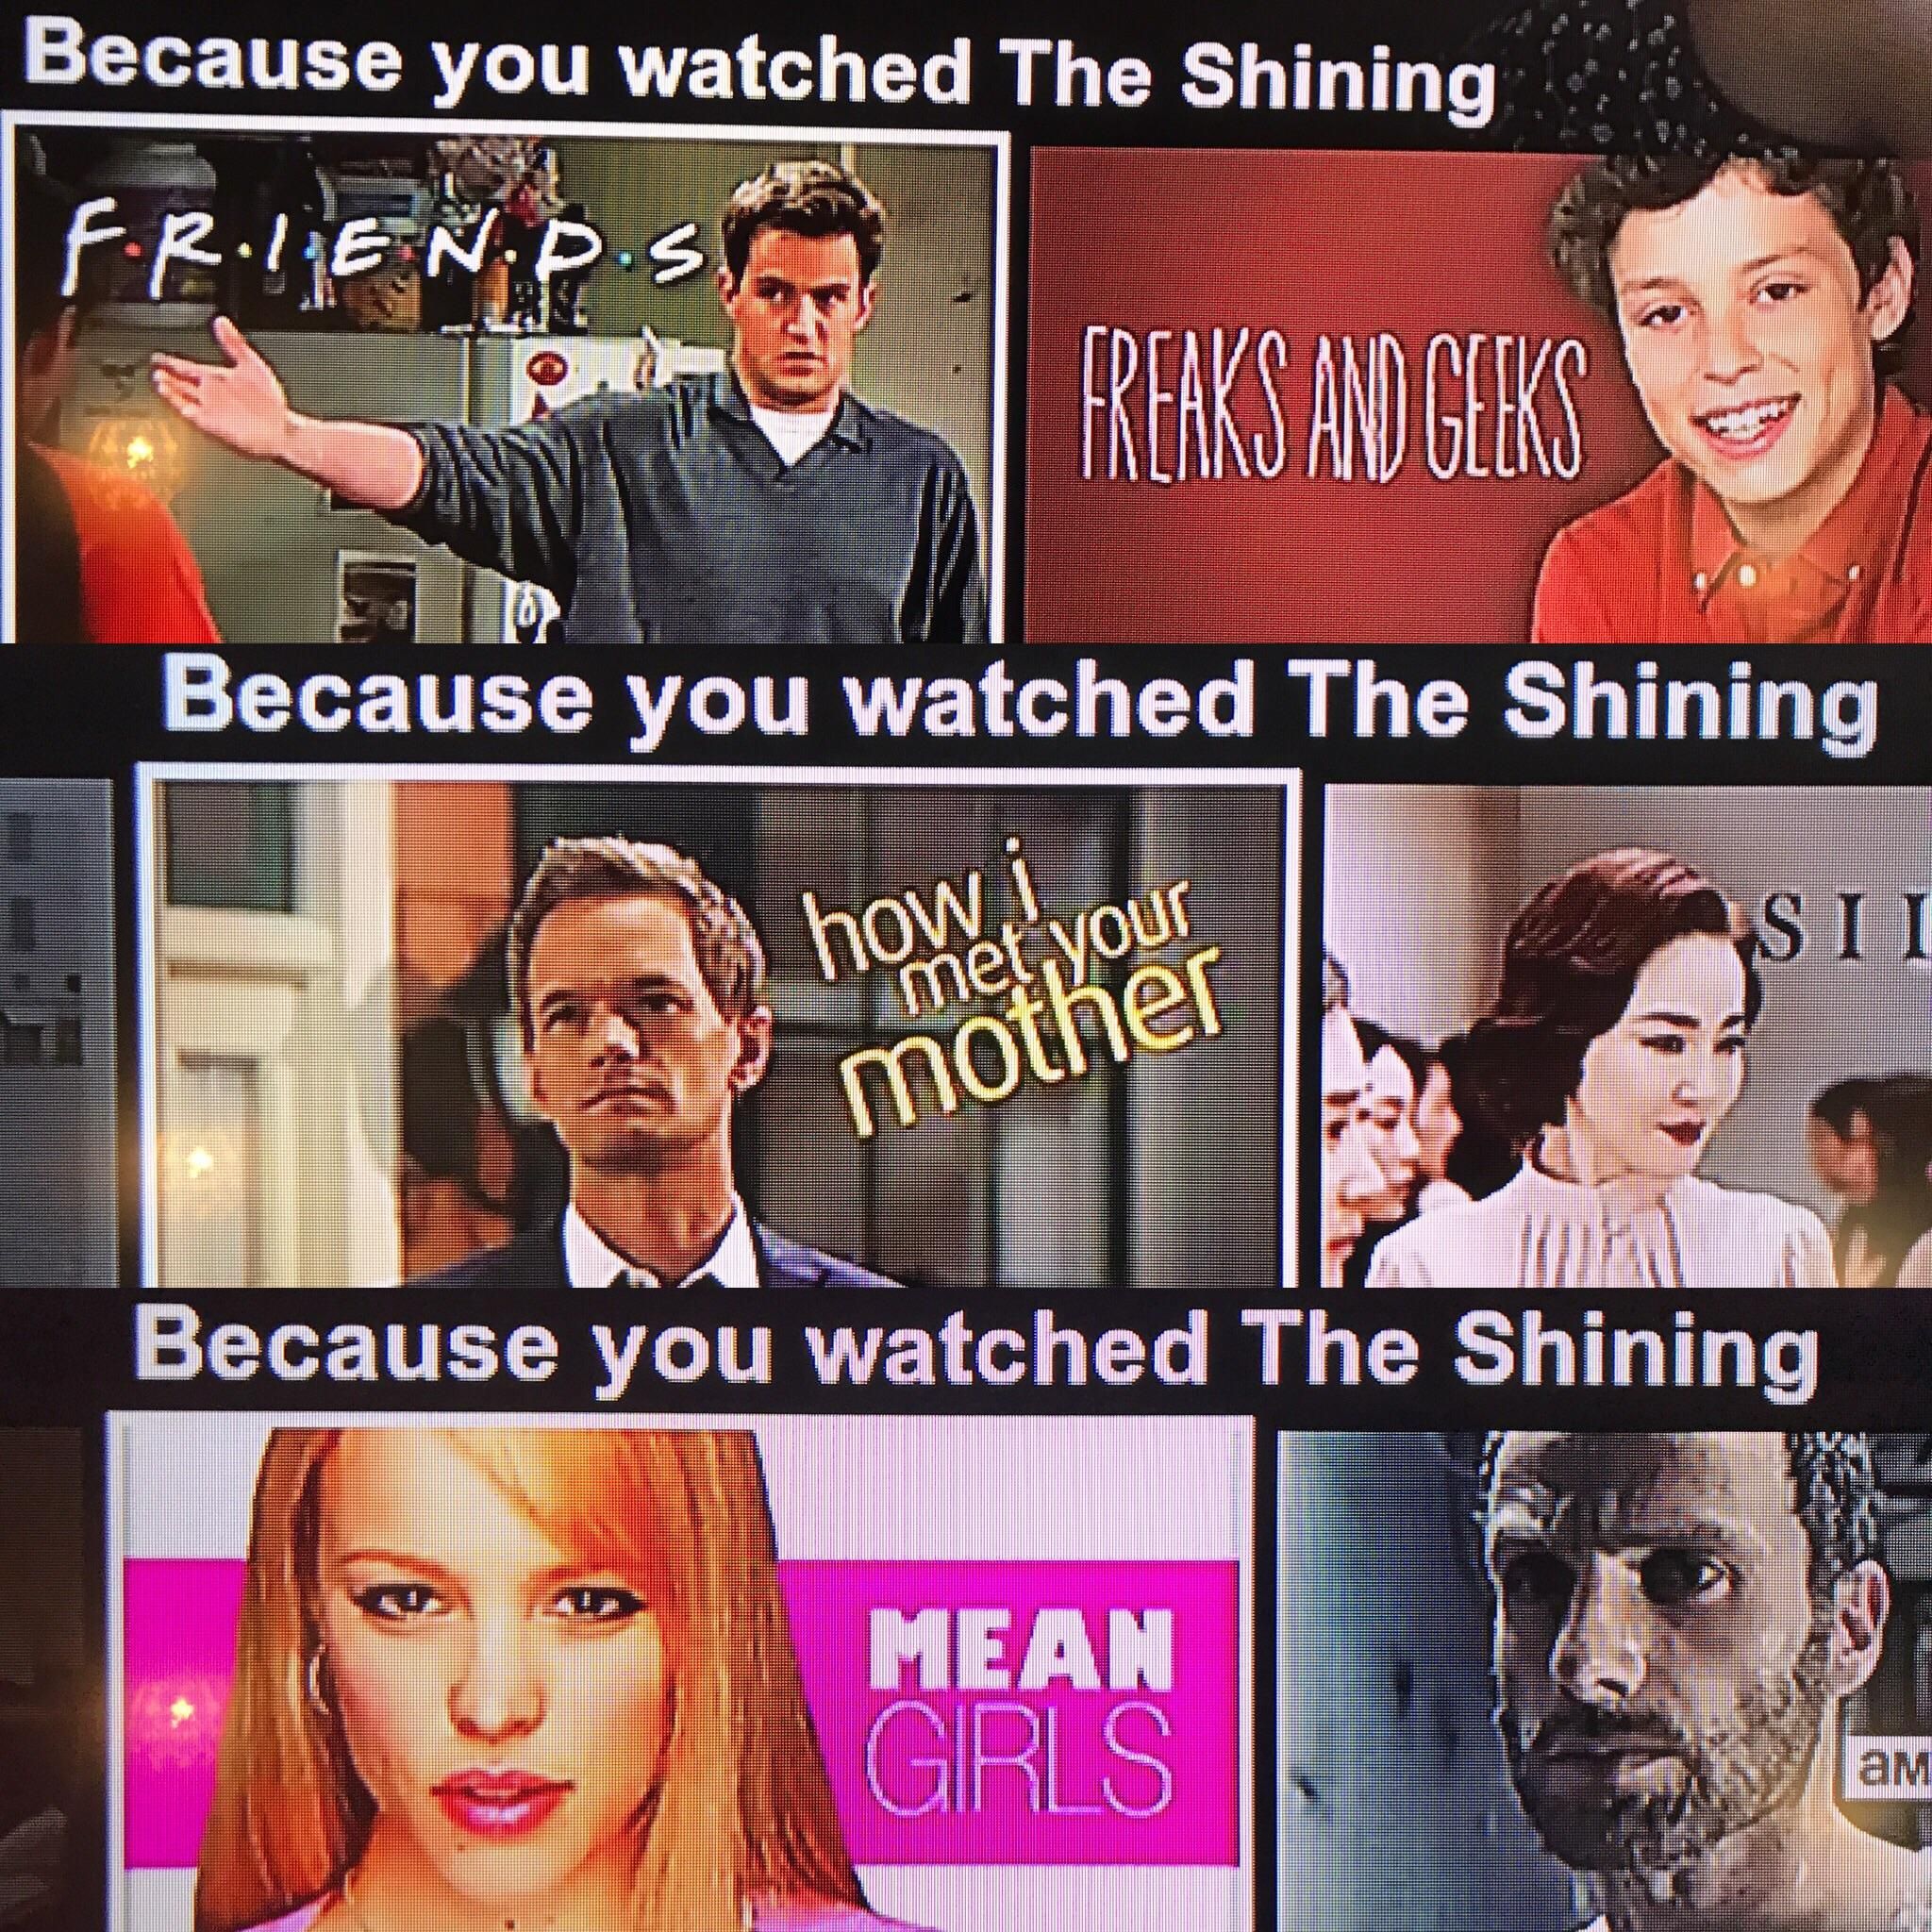 Have you even seen The Shining, Netflix?